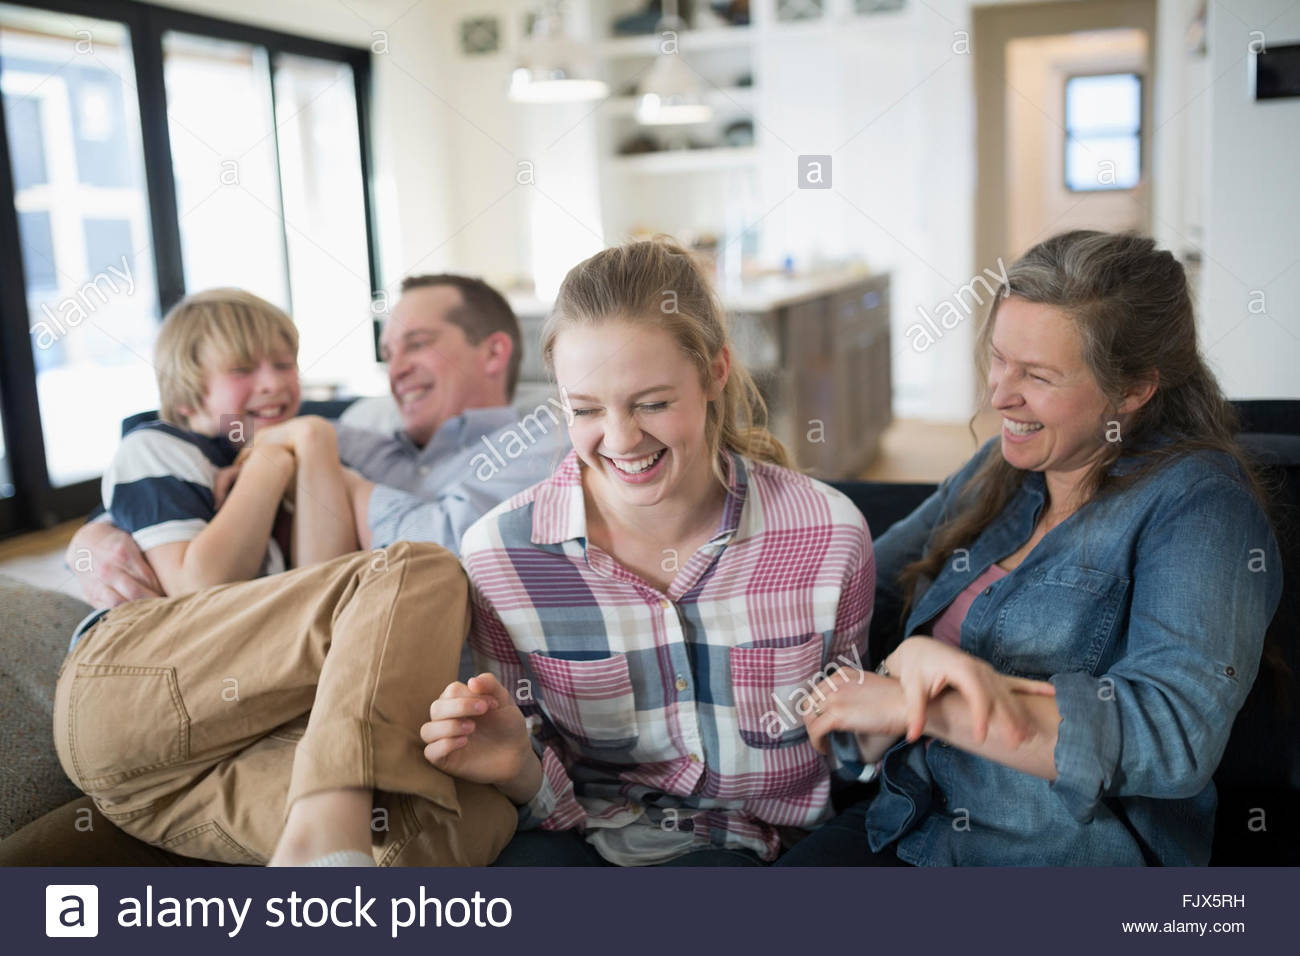 Laughing family on living room sofa Stock Photo